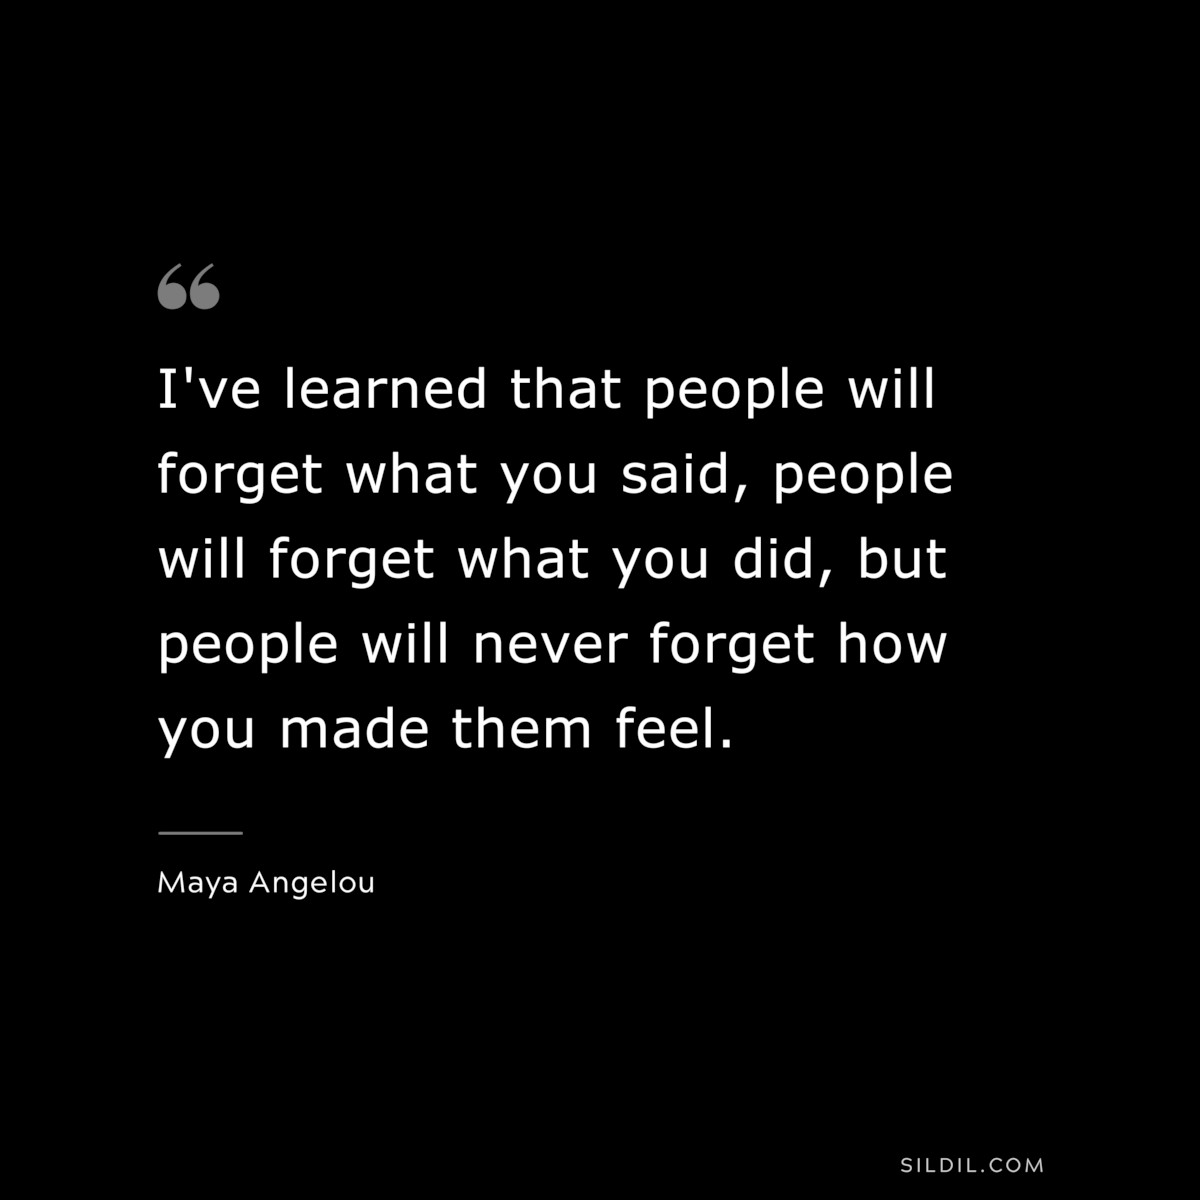 I've learned that people will forget what you said, people will forget what you did, but people will never forget how you made them feel. ― Maya Angelou